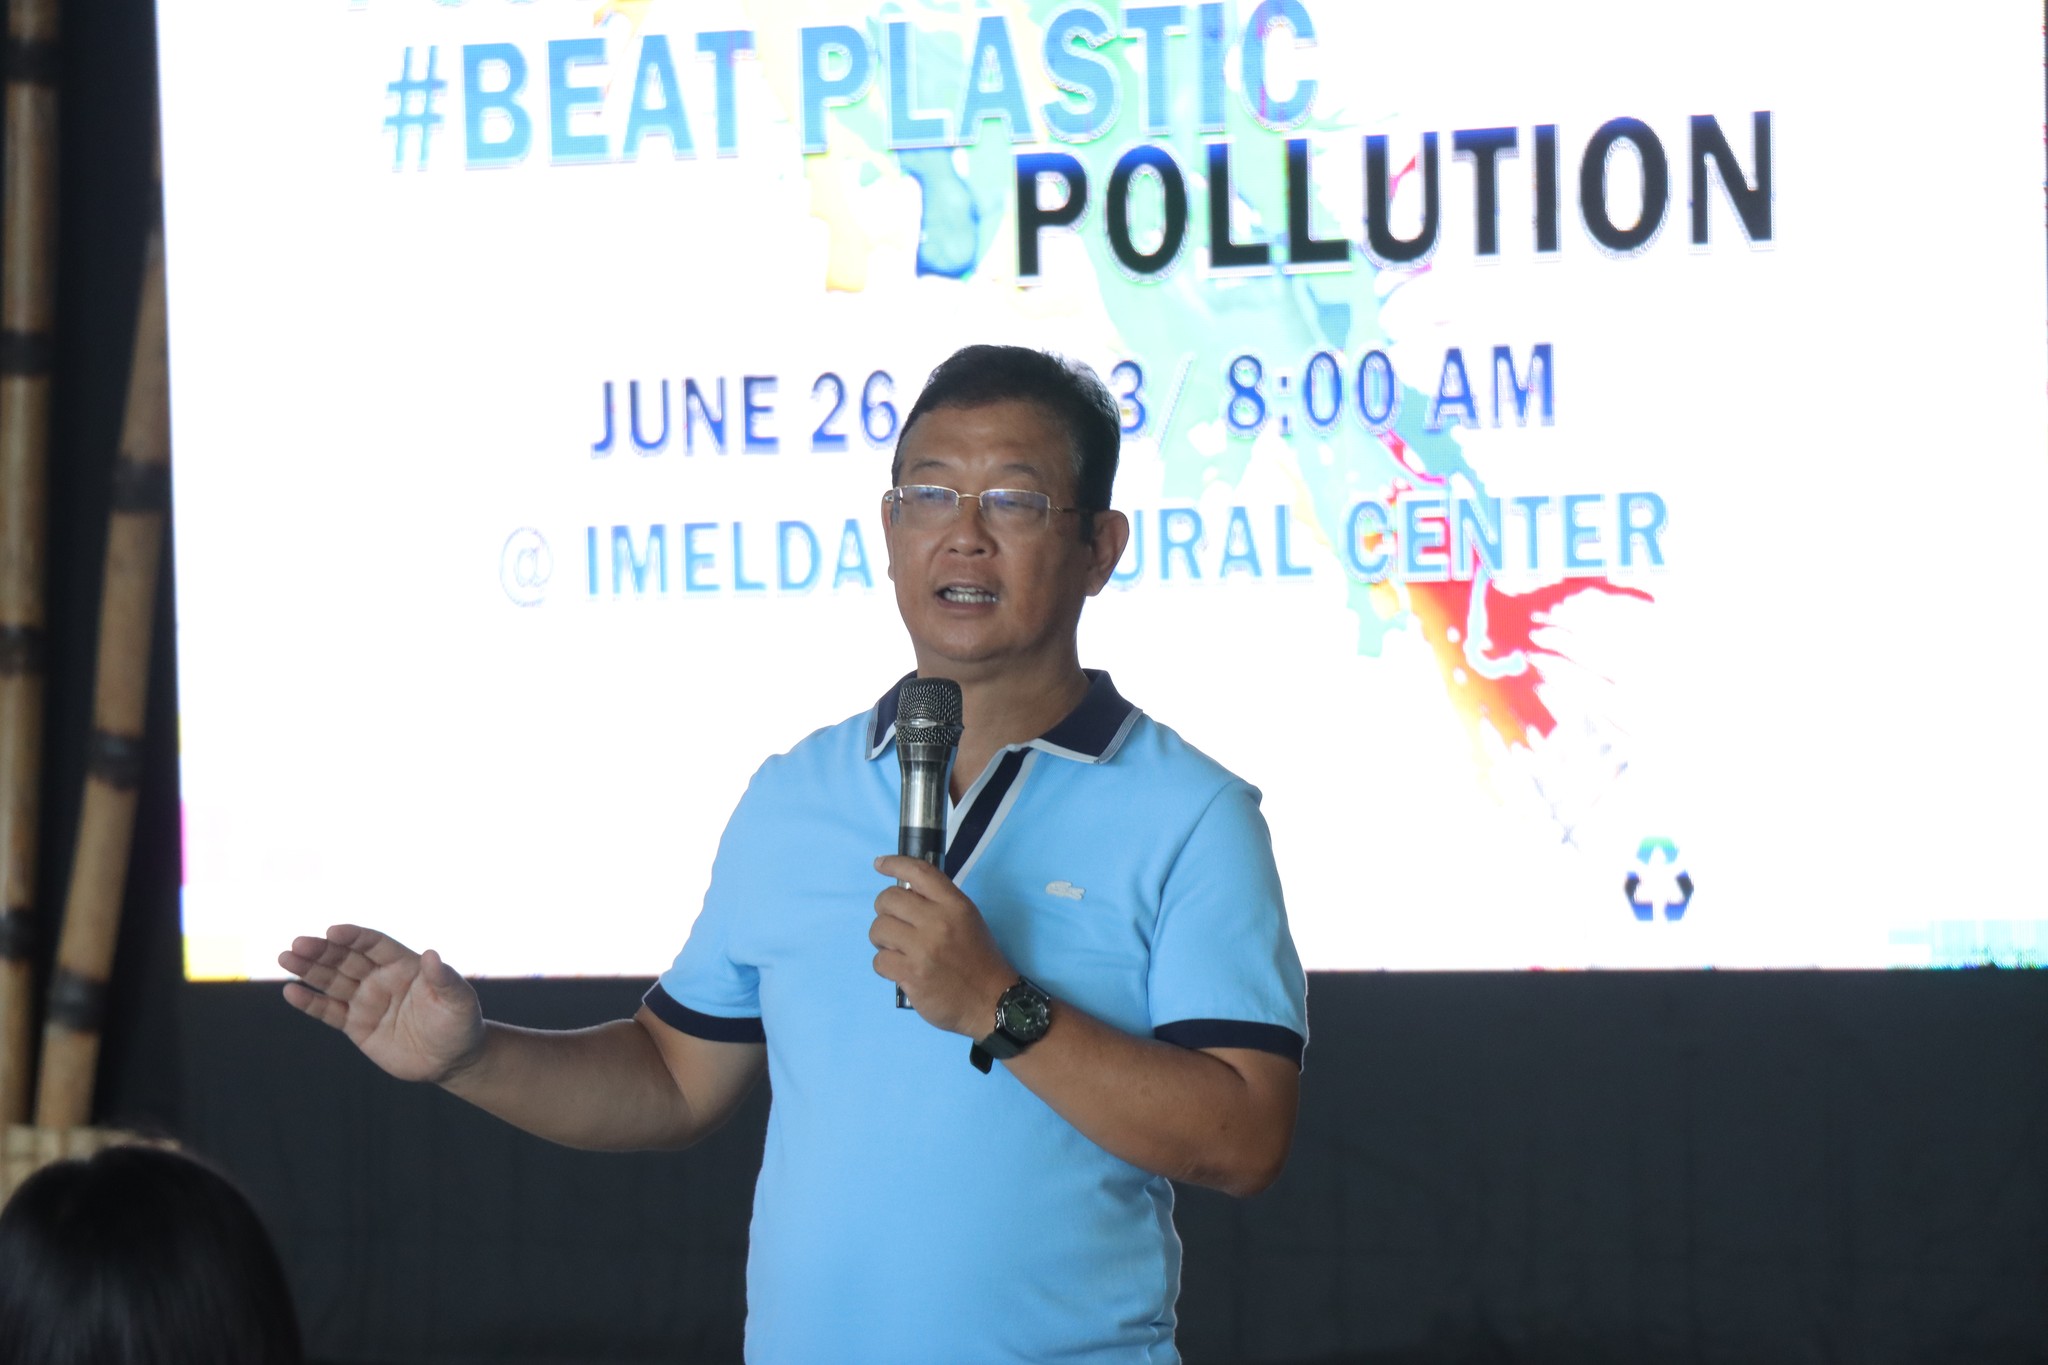 ELEVATING THE ADVOCACY CAMPAIGN ON ANTI-PLASTIC POLLUTION THROUGH POSTER MAKING COMPETITION